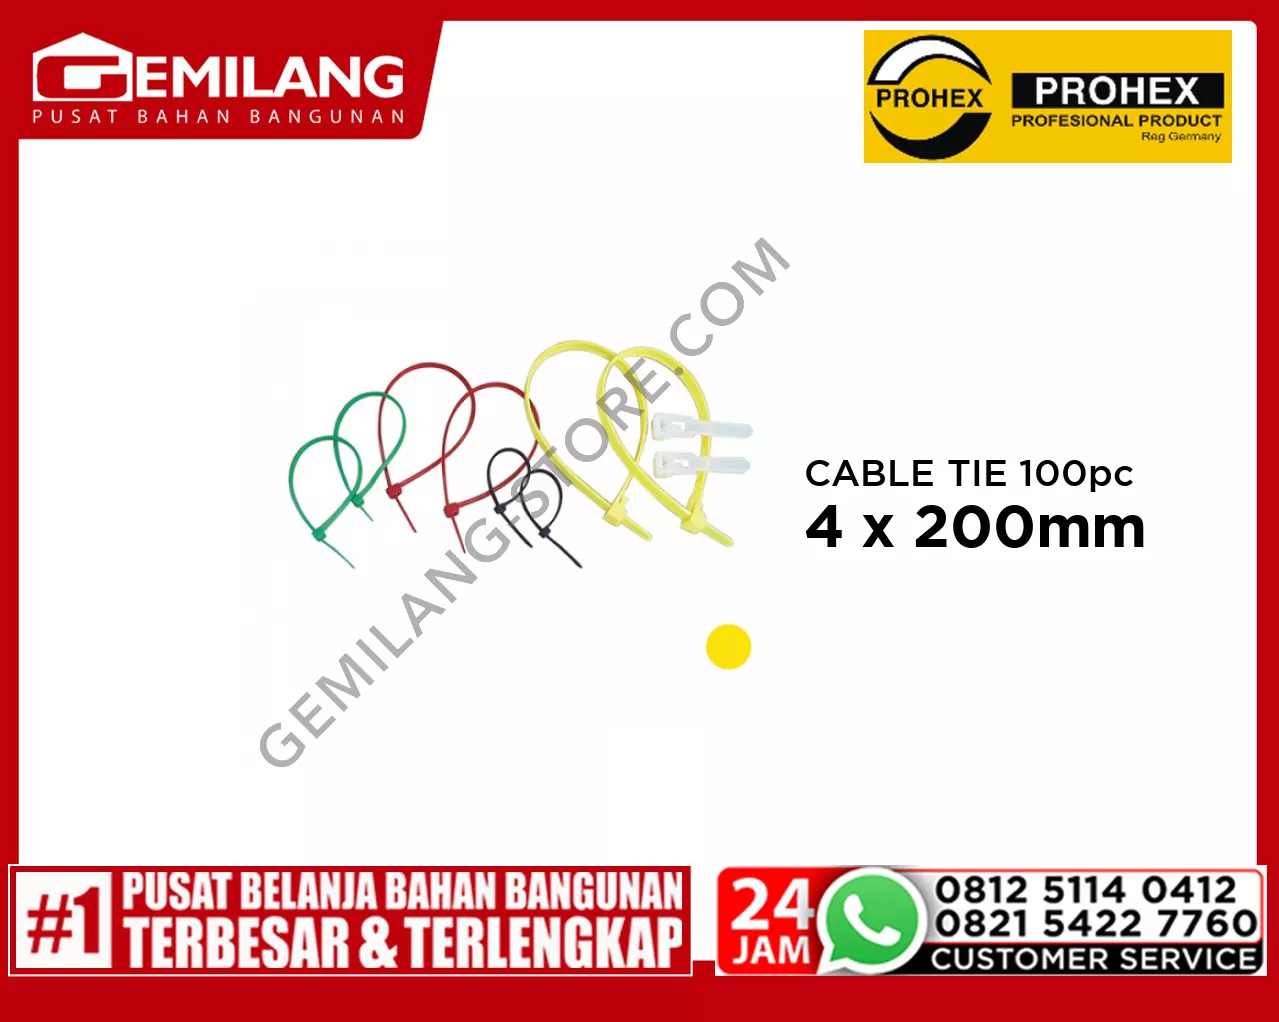 PROHEX CABLE TIE KUNING 4 x 200mm 100pc (4580-123)